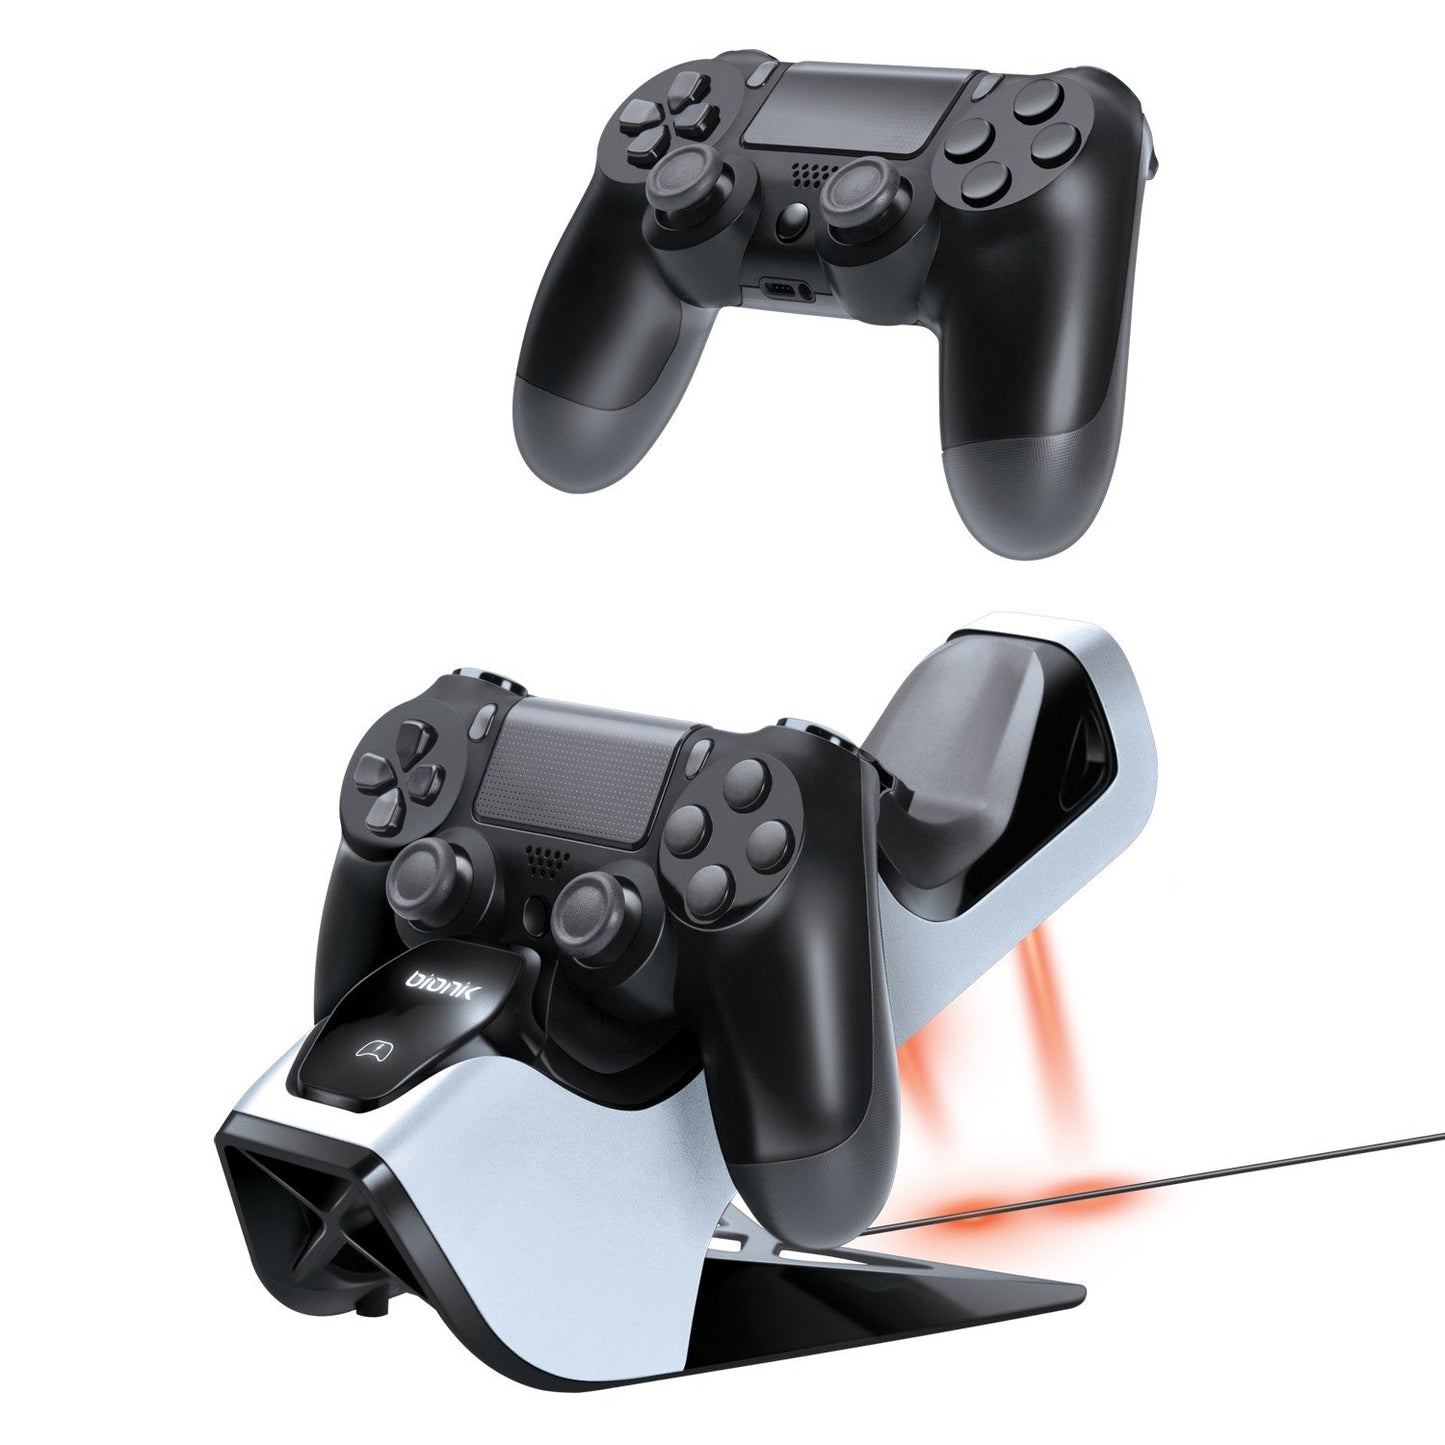 Bionik BNK-9027 Power Stand Dual Controller Charging System for PlayStation 4